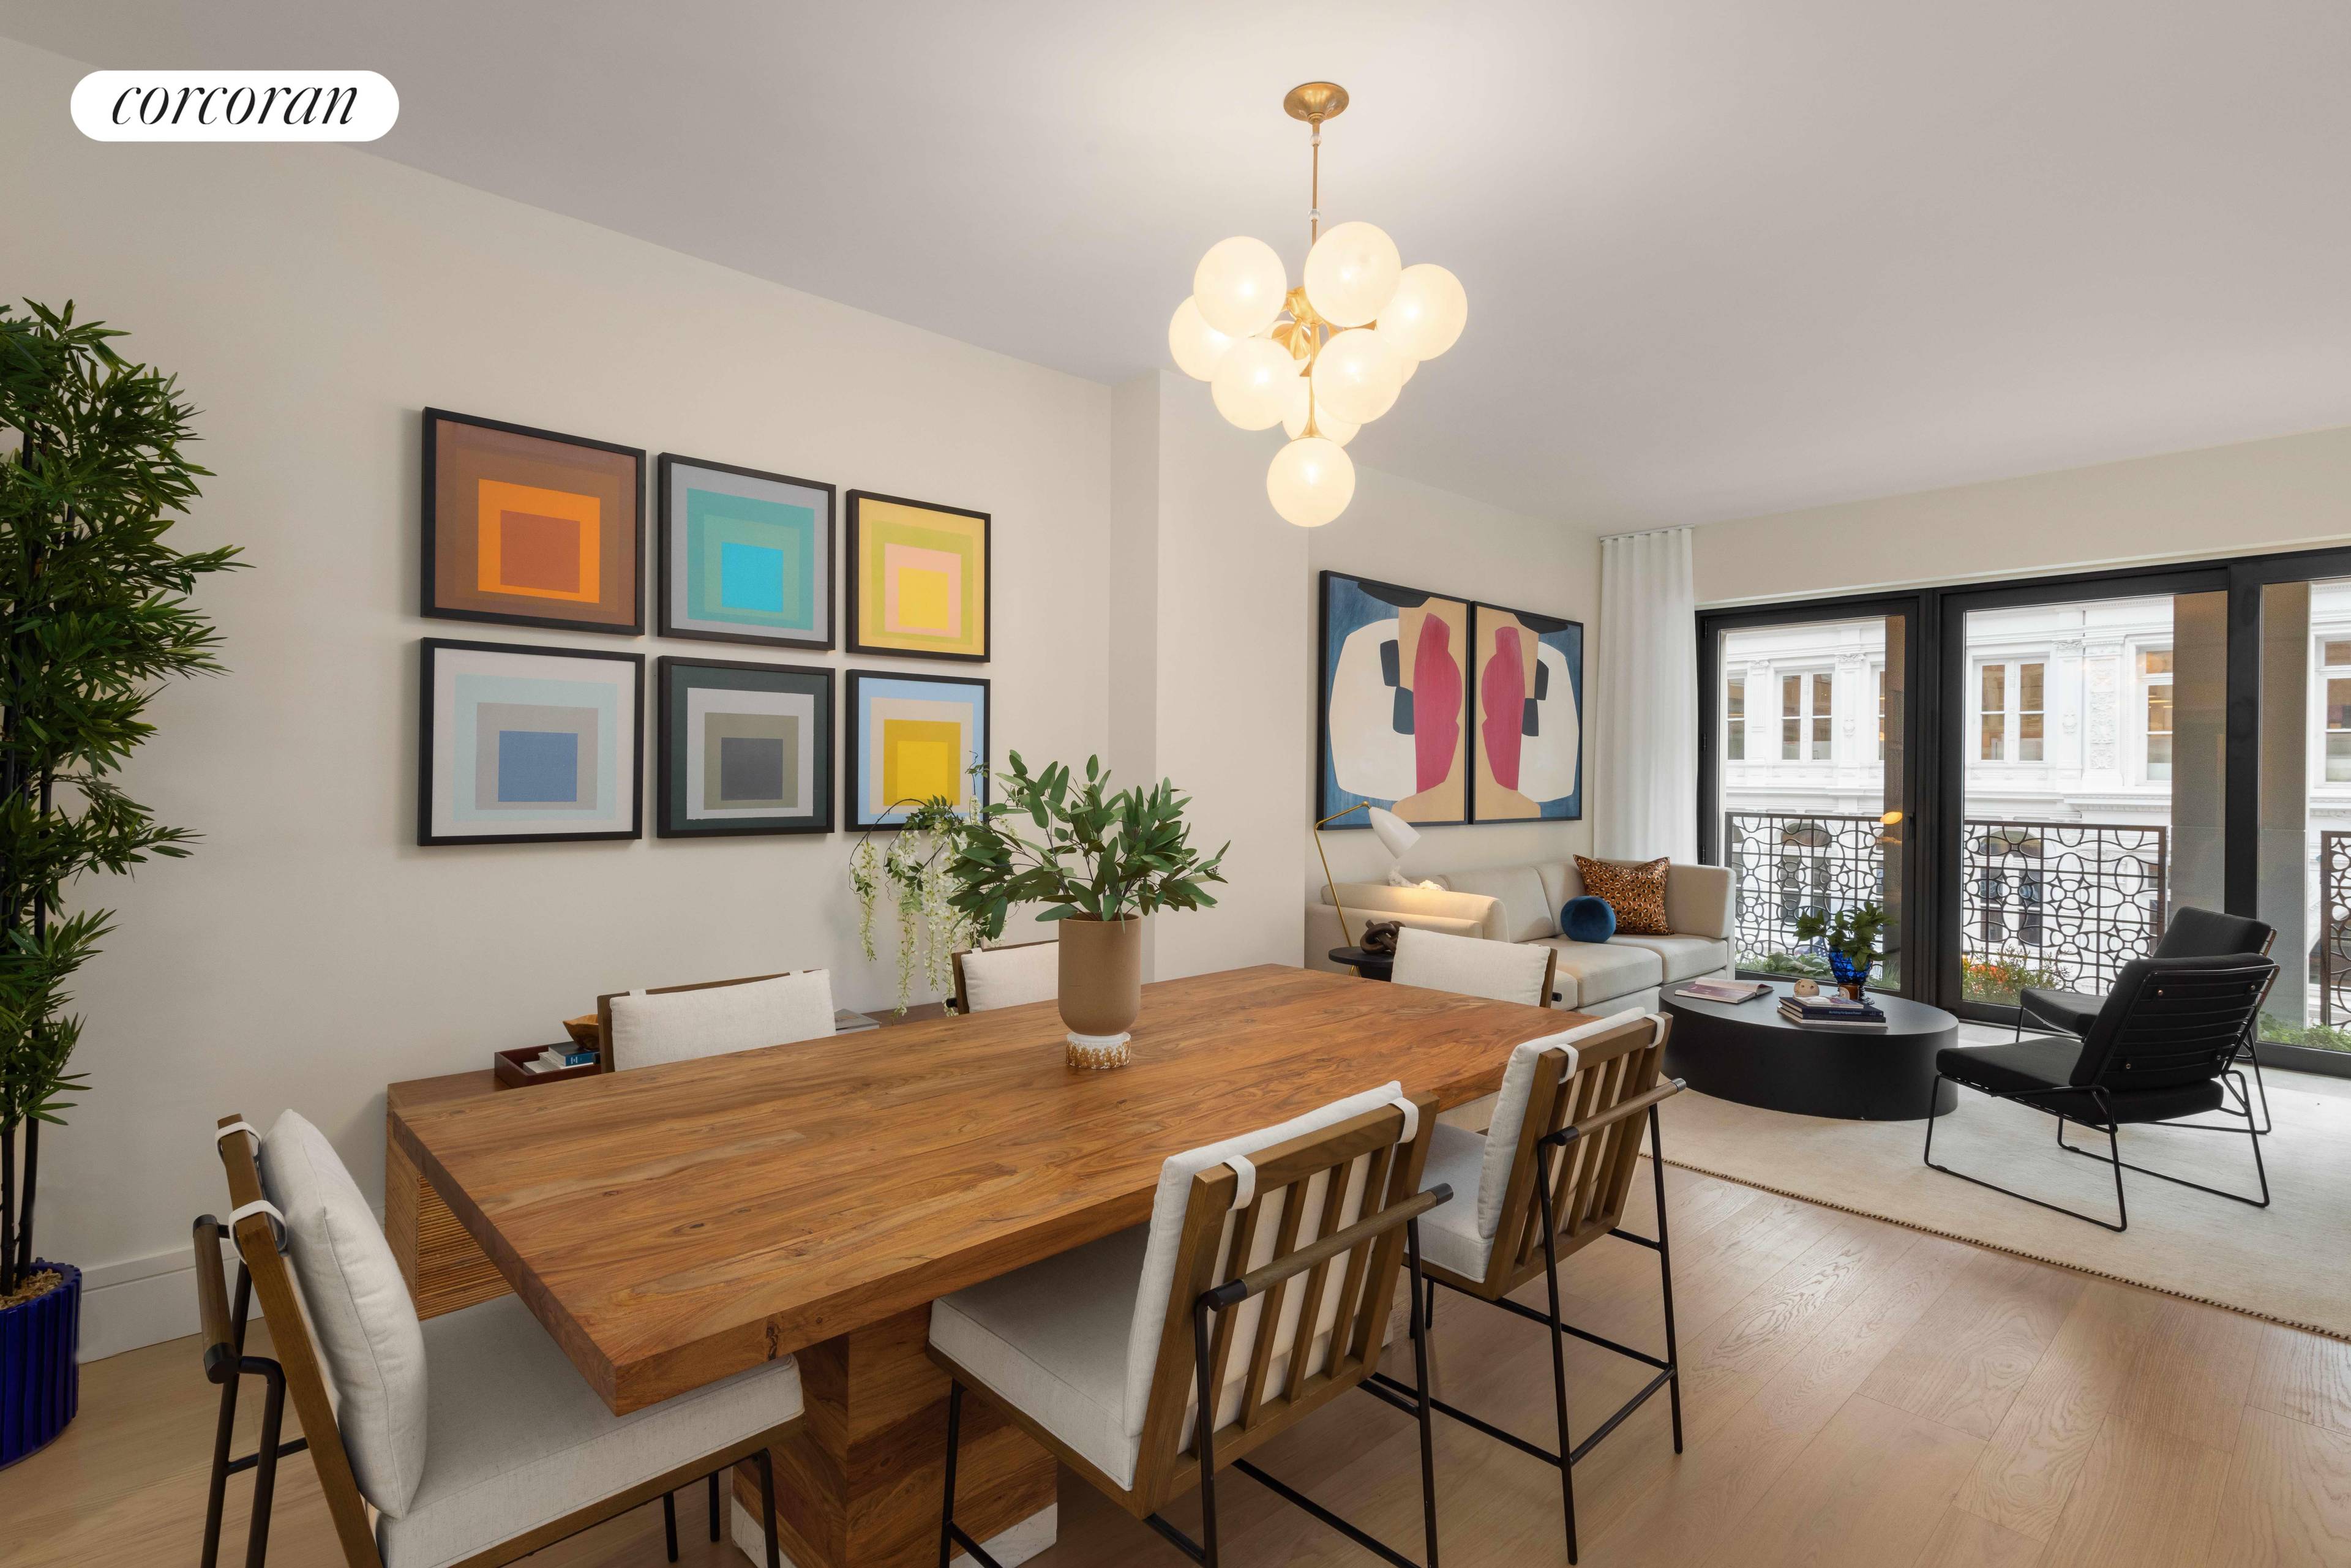 NEWLY PRICED ! Flooded with light, this half floor home enjoys southern and eastern views through floor to ceiling windows accented by Flatiron House's signature planted loggias.